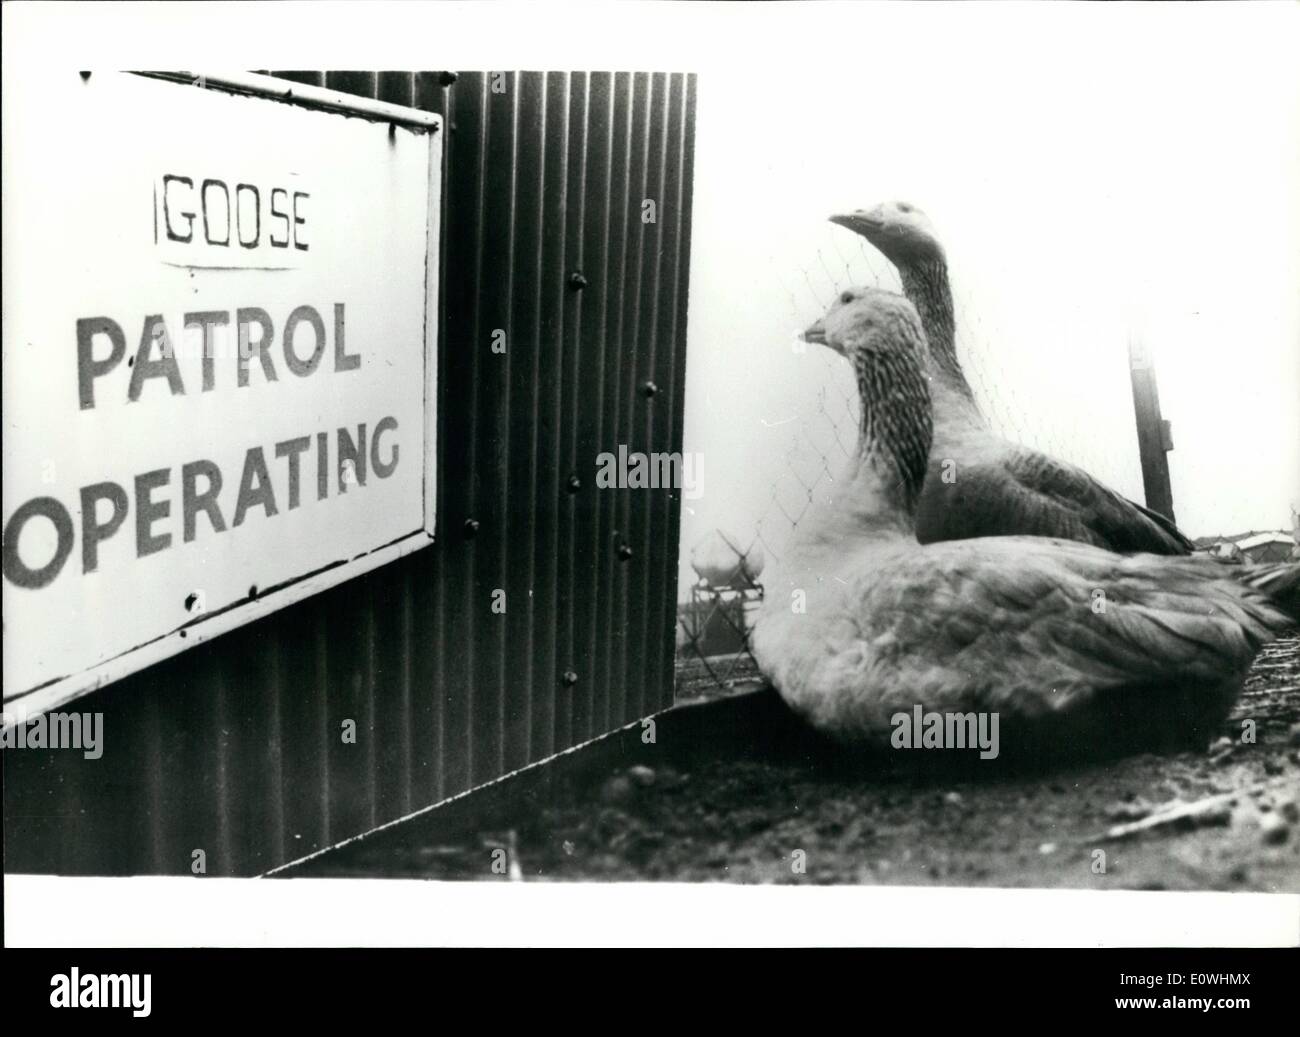 Jan. 01, 1963 - Operation Goose Patrol!!!: Thieves beware! Operation Goose Patrol has moved into the company site of C.A.G. Ltd, a haulage company in South London. The recent Act of parliament, outlawing guard dogs unless under the control of a qualified handler, has enabled the high flying geese to to get to grips with the job of making after the company premises. The geese are wild, noisy and can bite viciously if you get caught Stock Photo